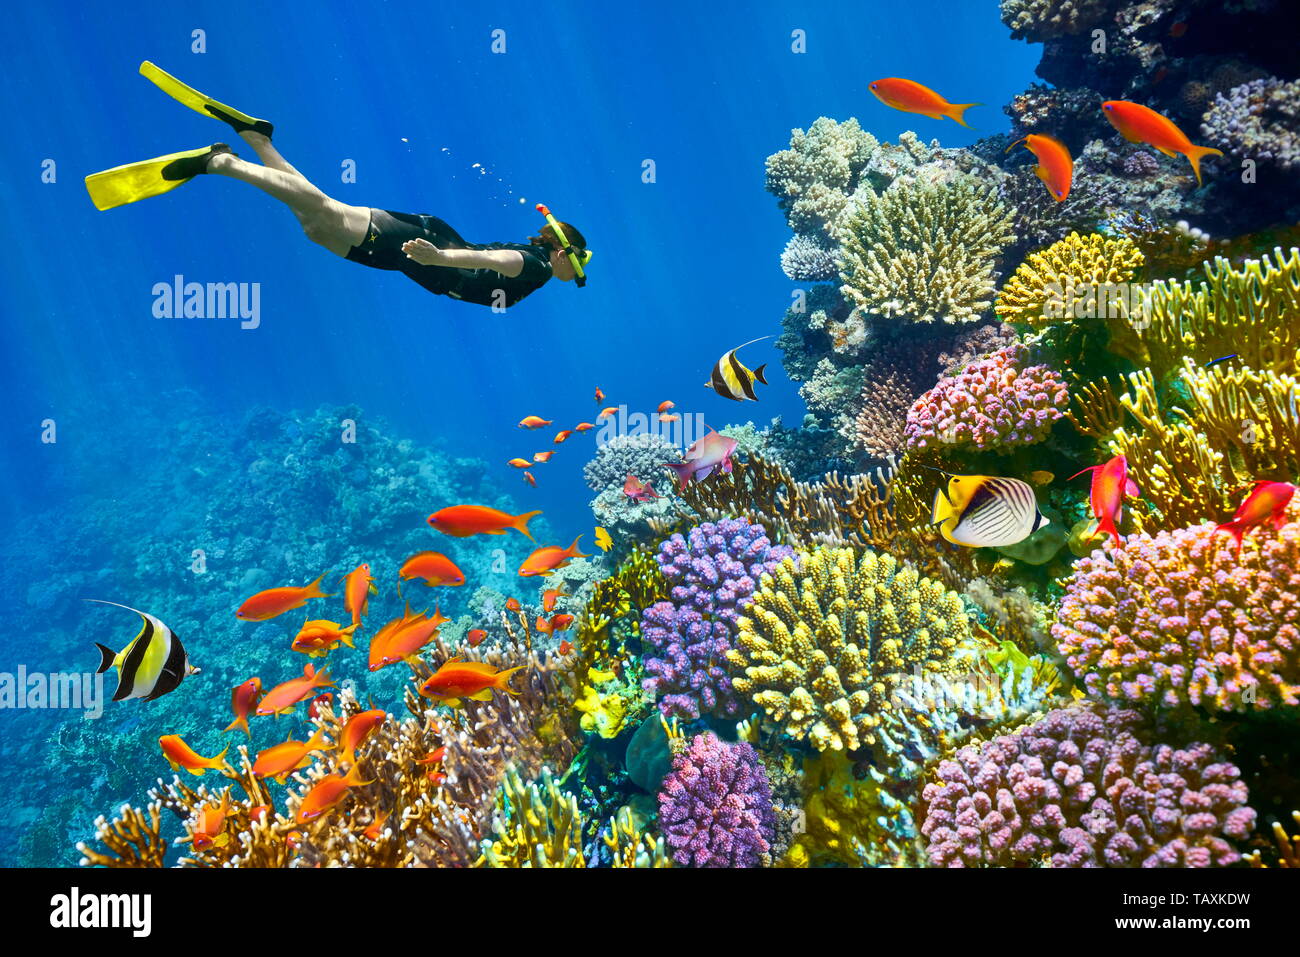 Red Sea, coral reef and fishes, Sharm El Sheikh, Egypt Stock Photo